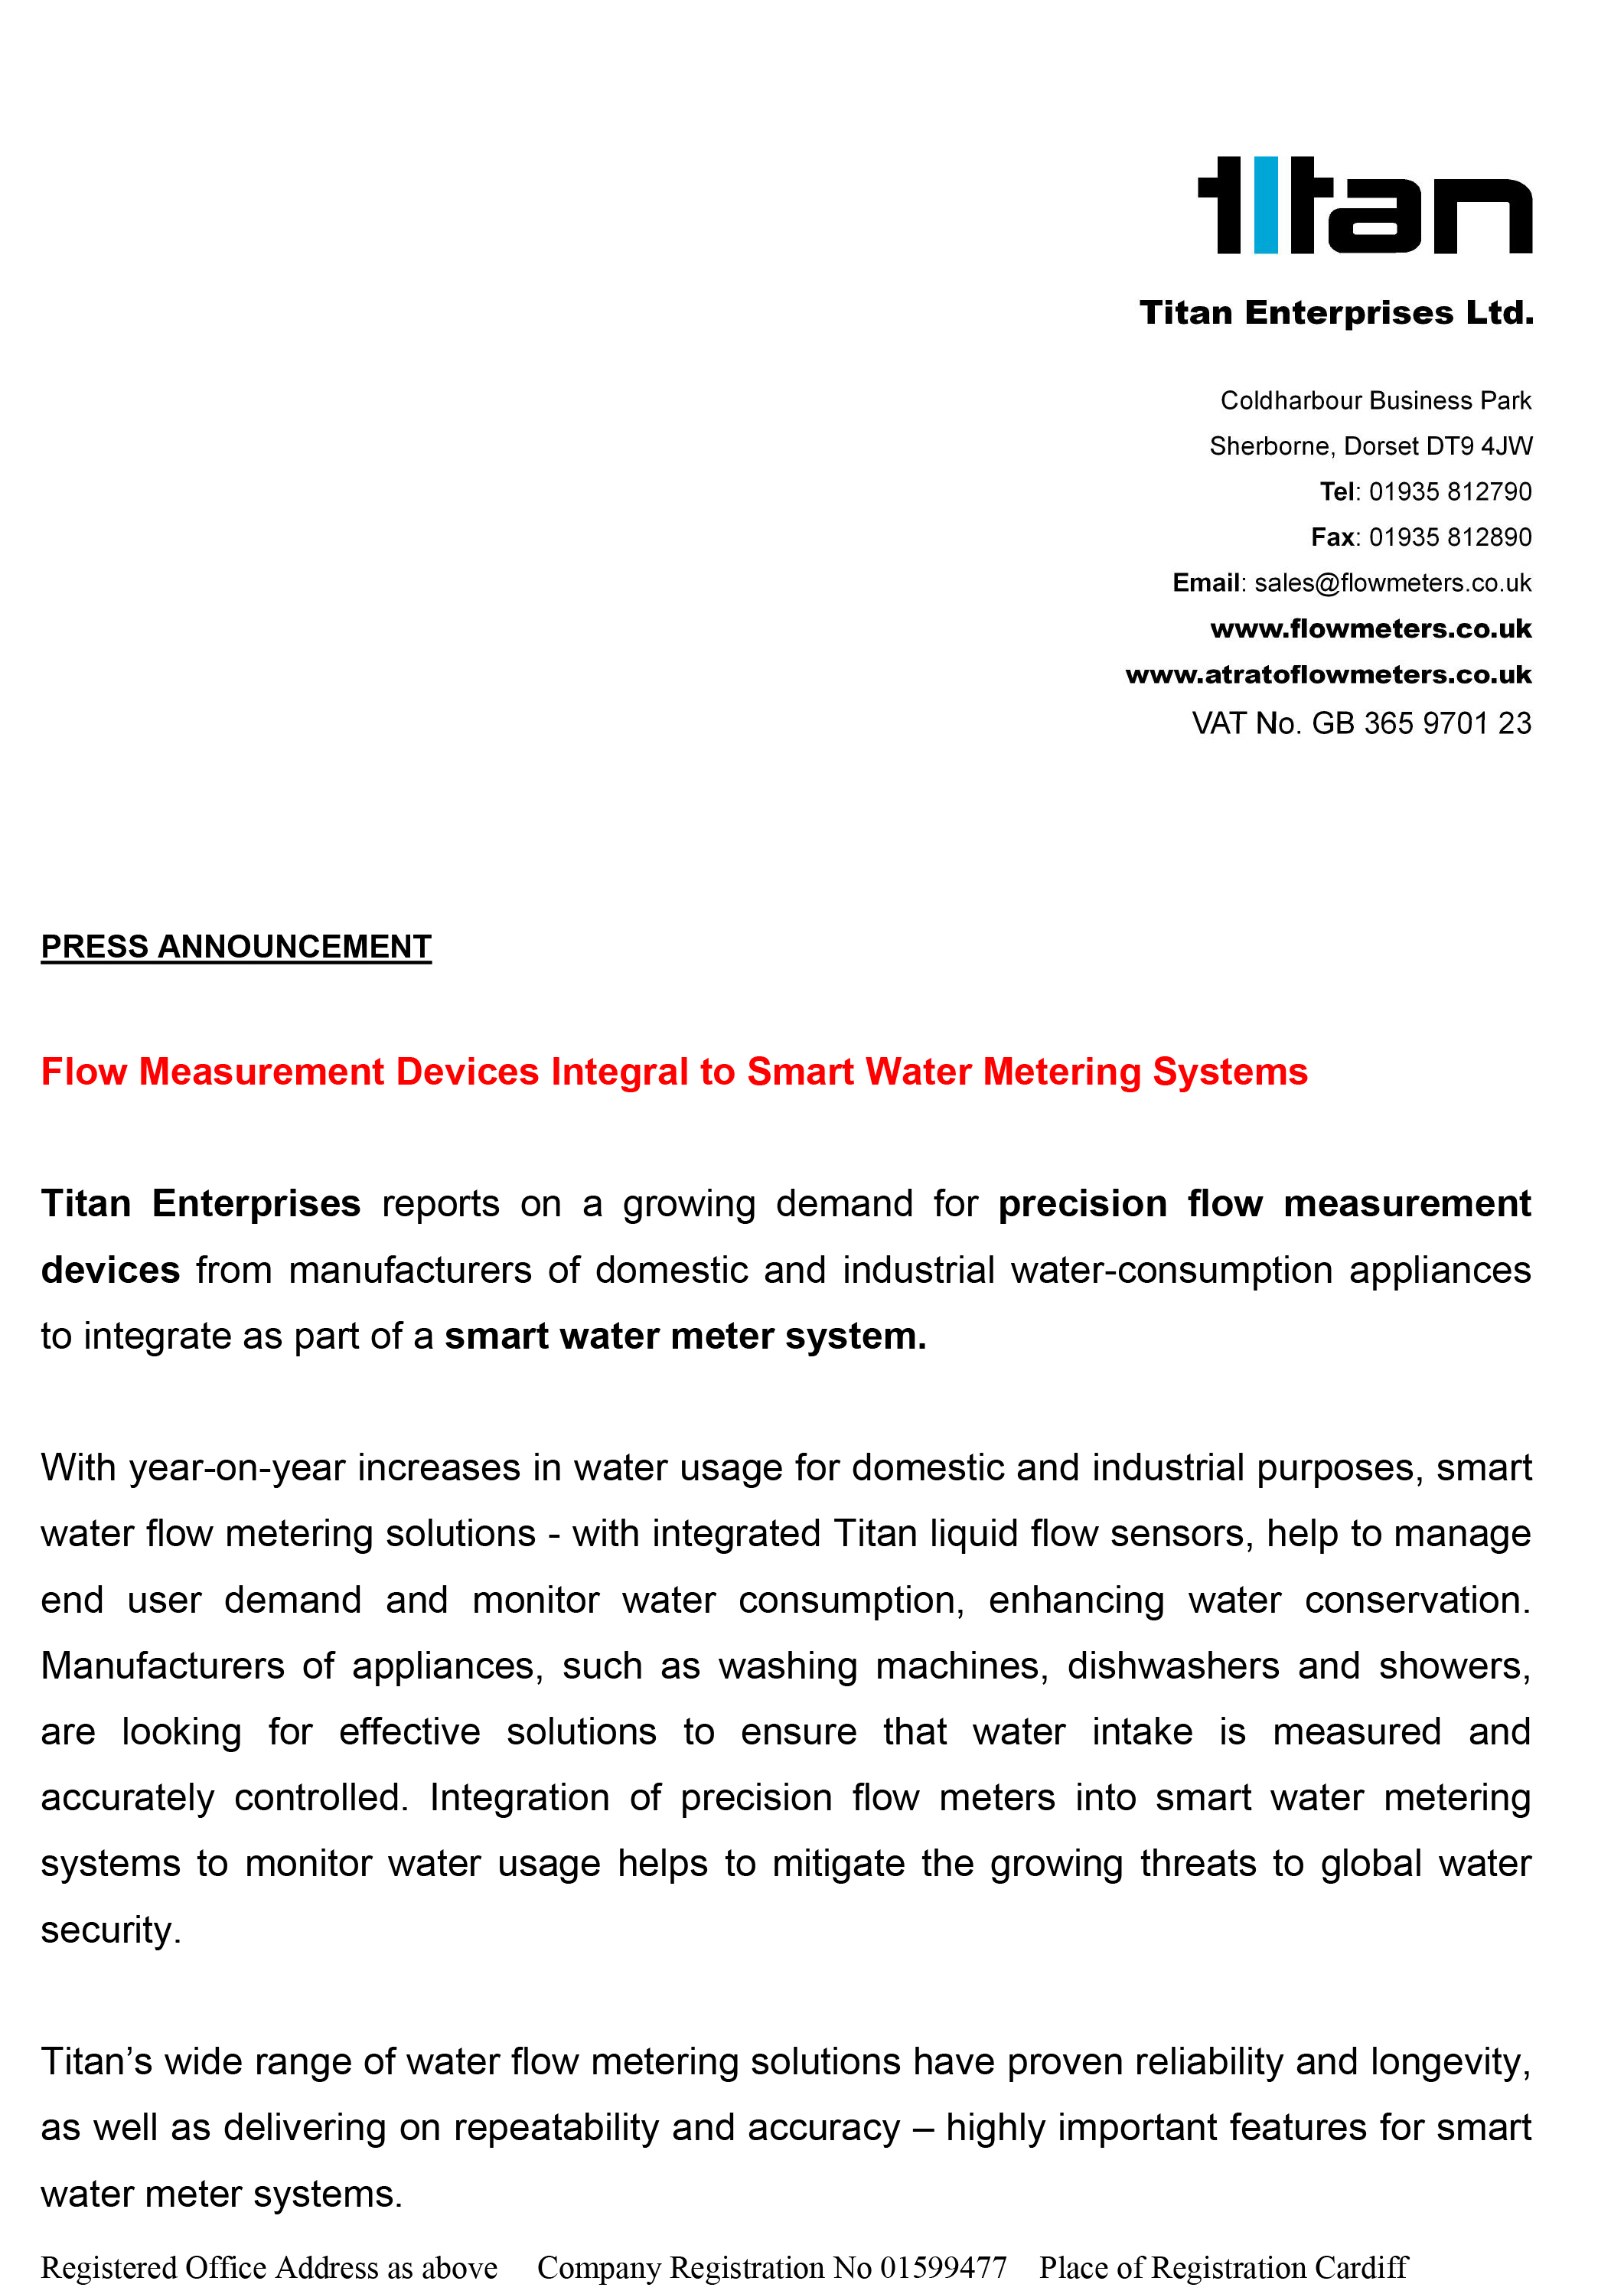 Flow Measurement Devices Integral to Smart Water Metering Systems